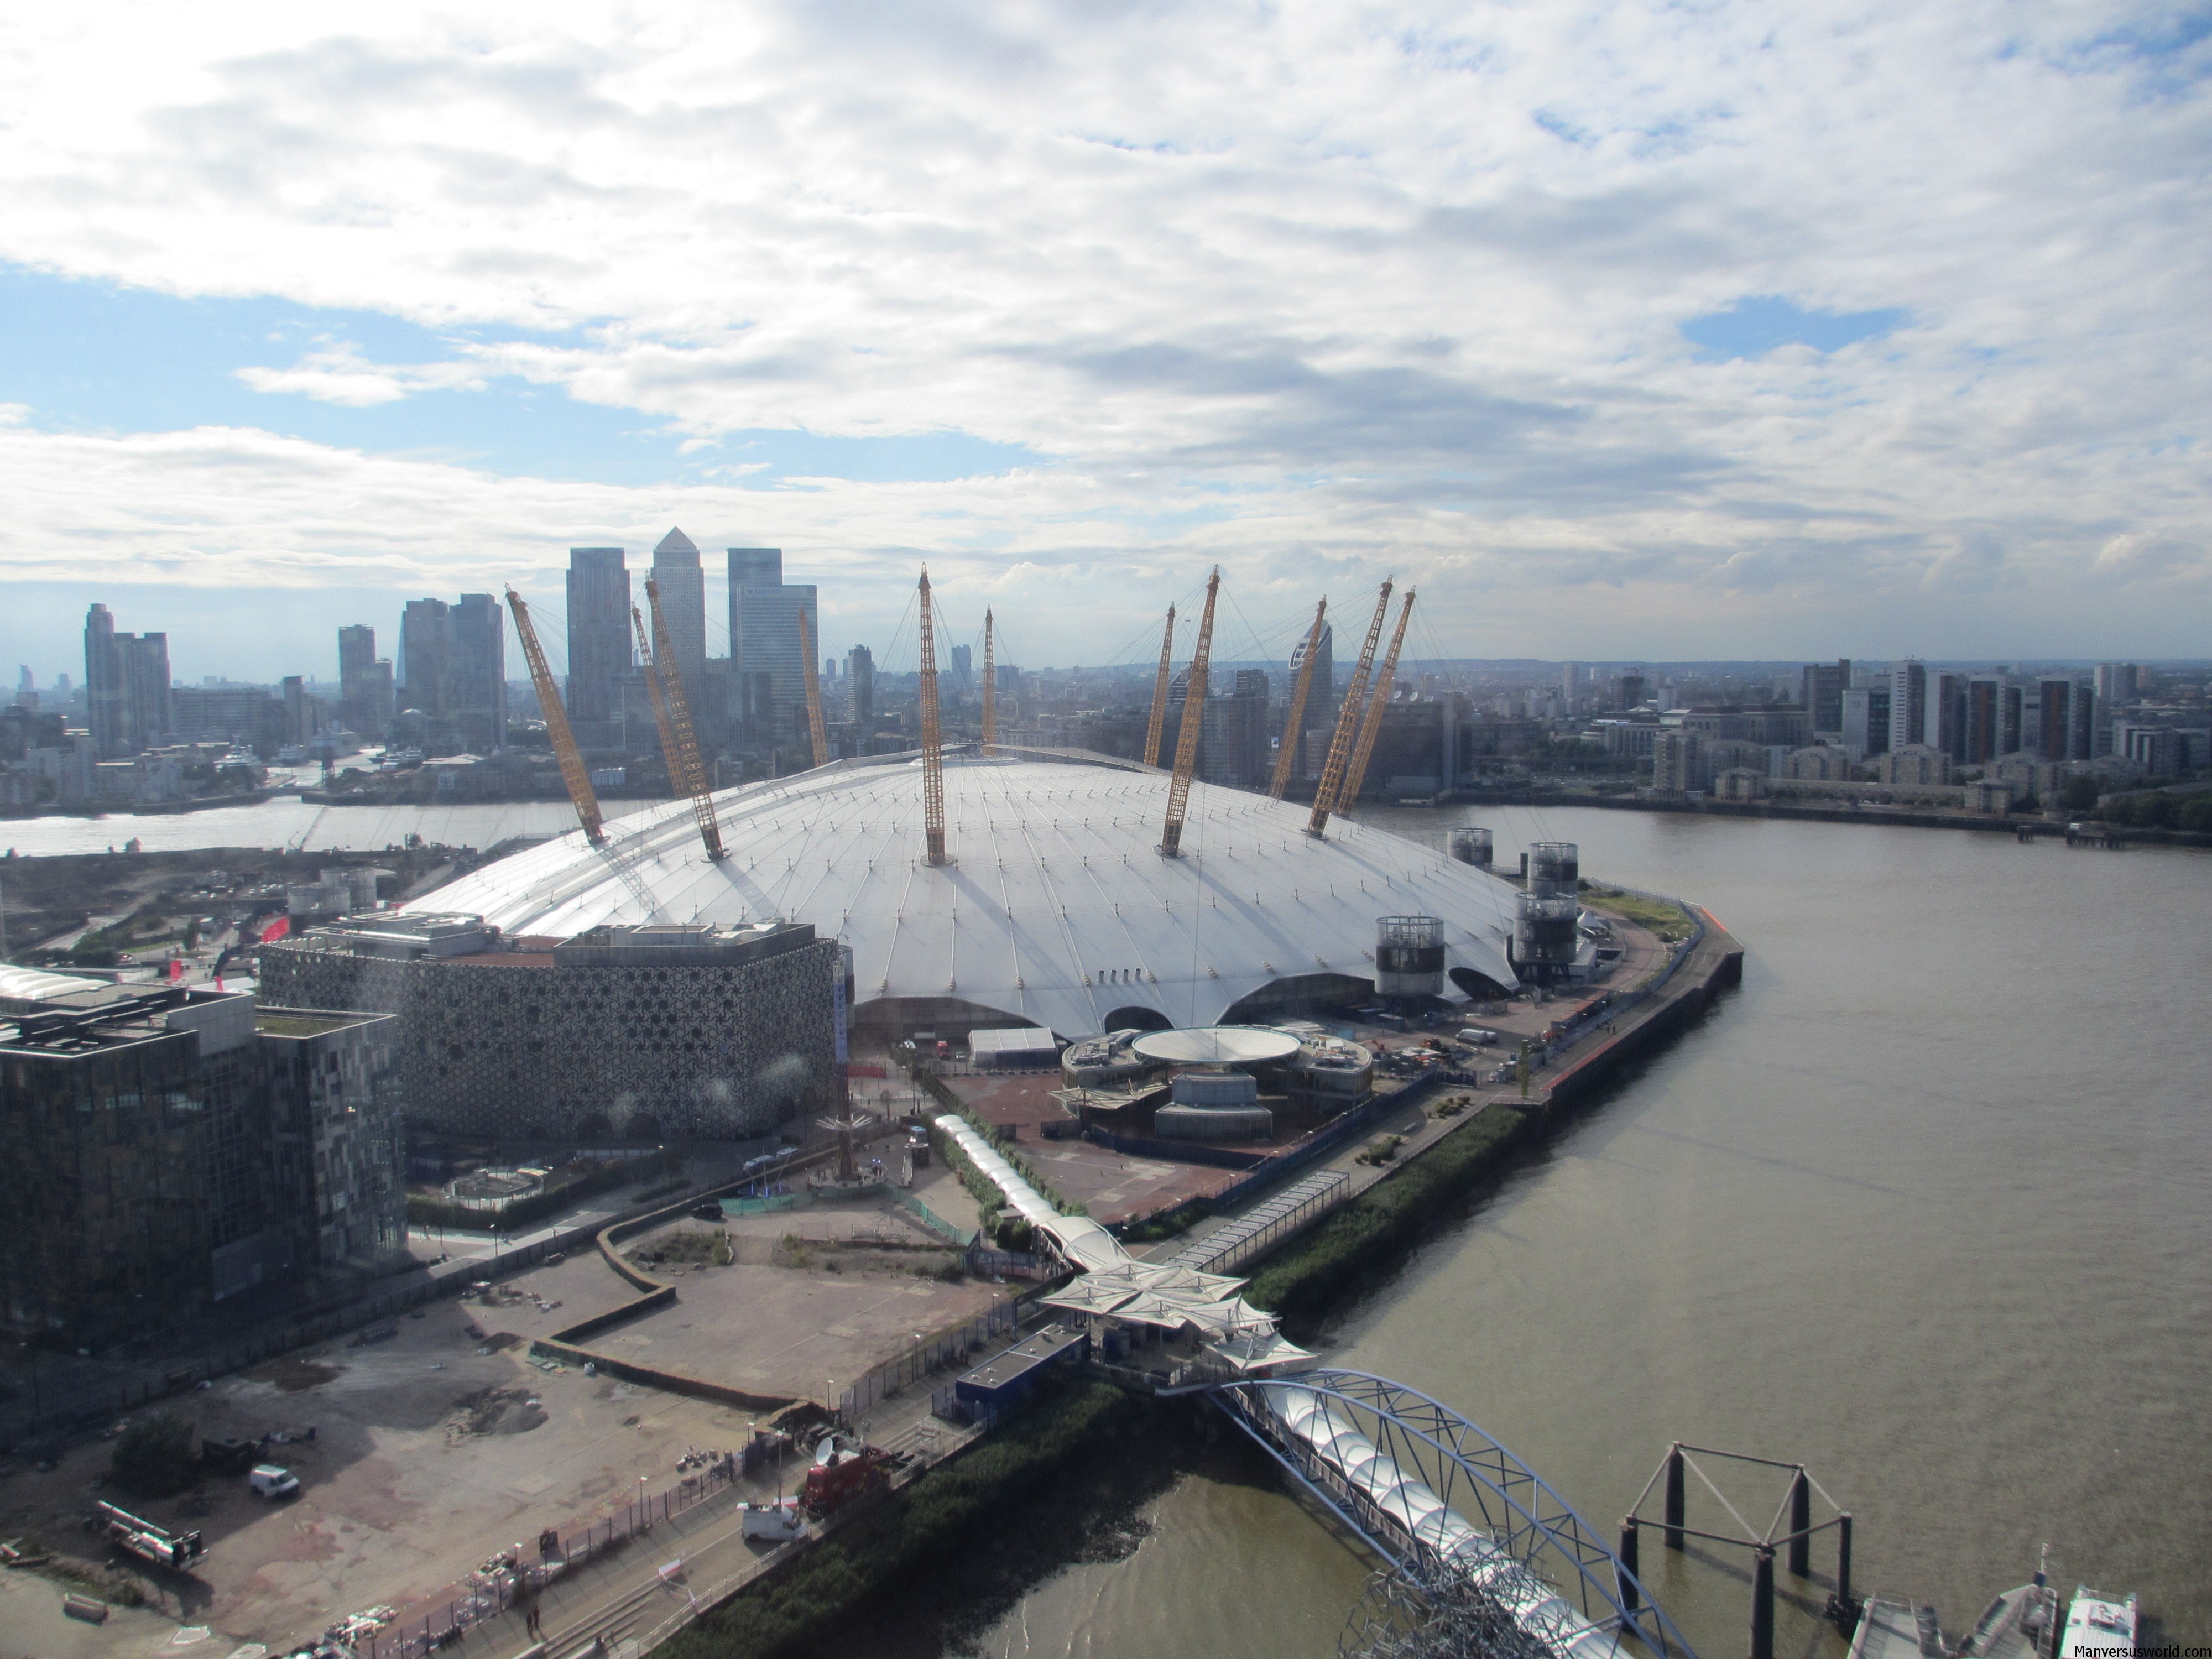 Views over London and the O2 from the cable car